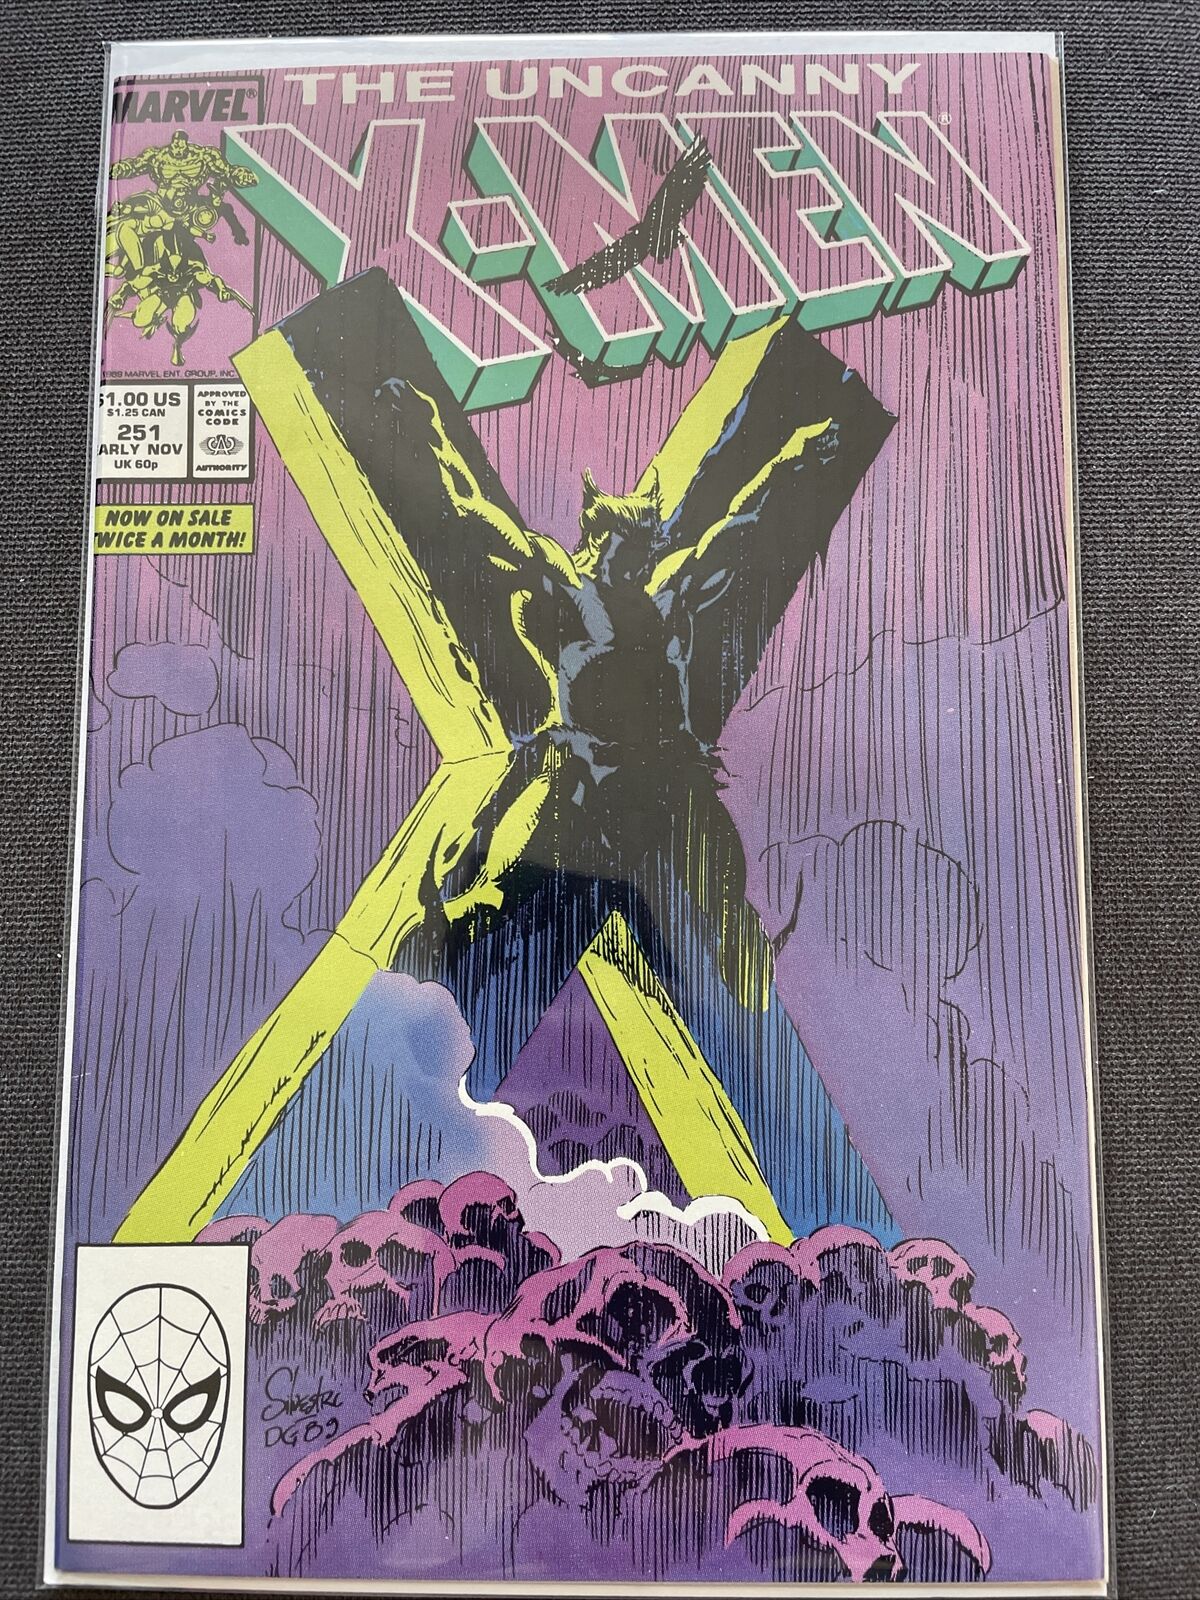 Marvel - THE UNCANNY X-MEN #251 (Great Condition) bagged and boarded